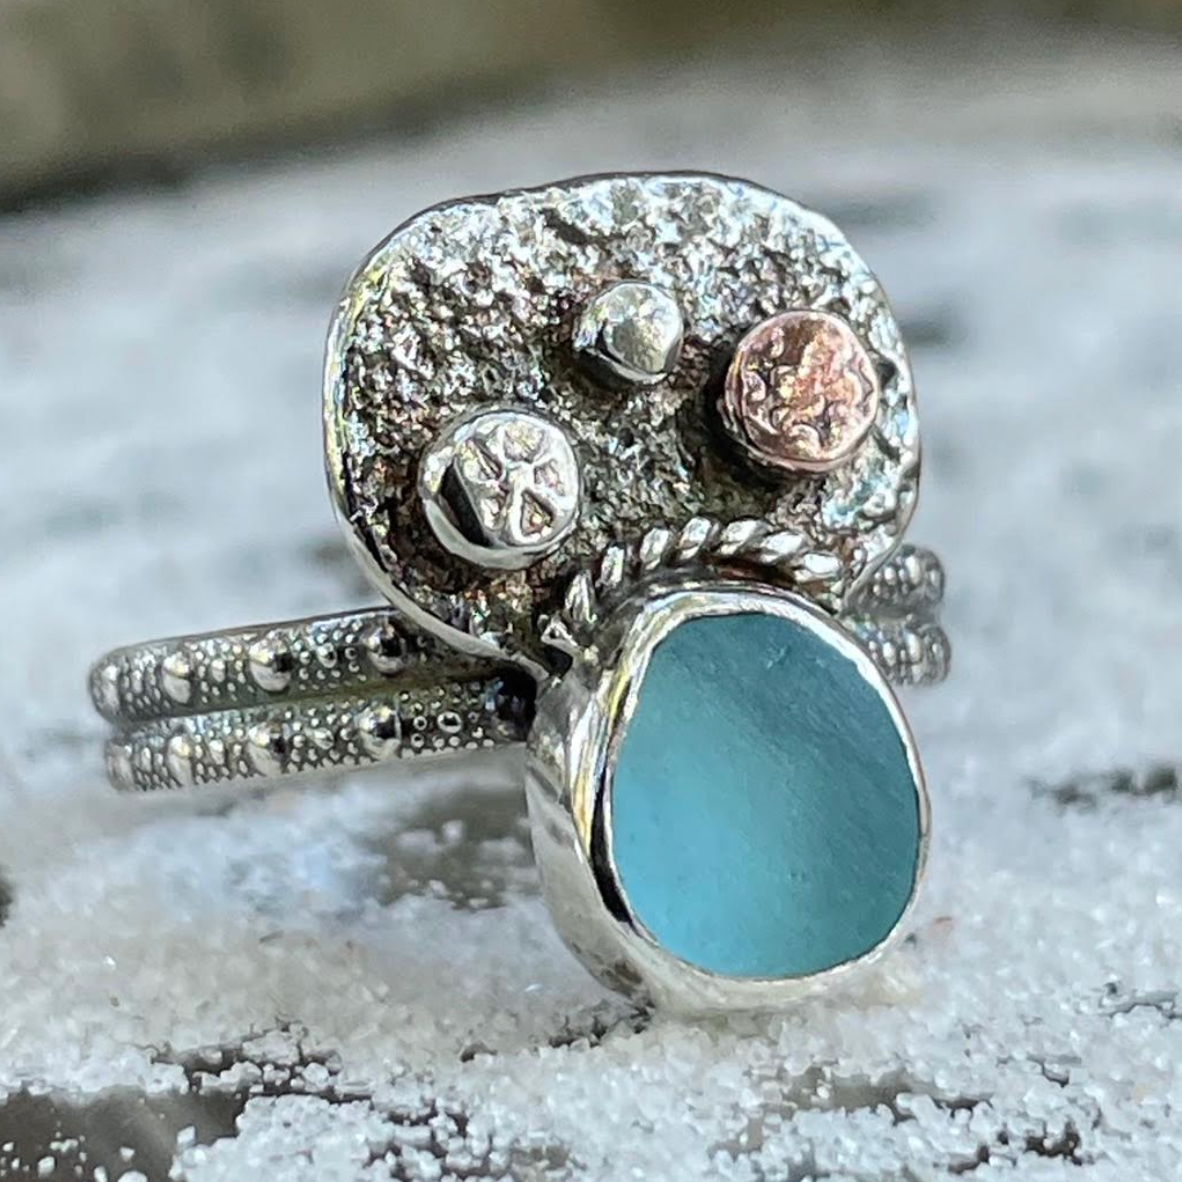 English Cyan Recycled Silver and Copper Ring Size 6 by Shoreline Angel (R2062)